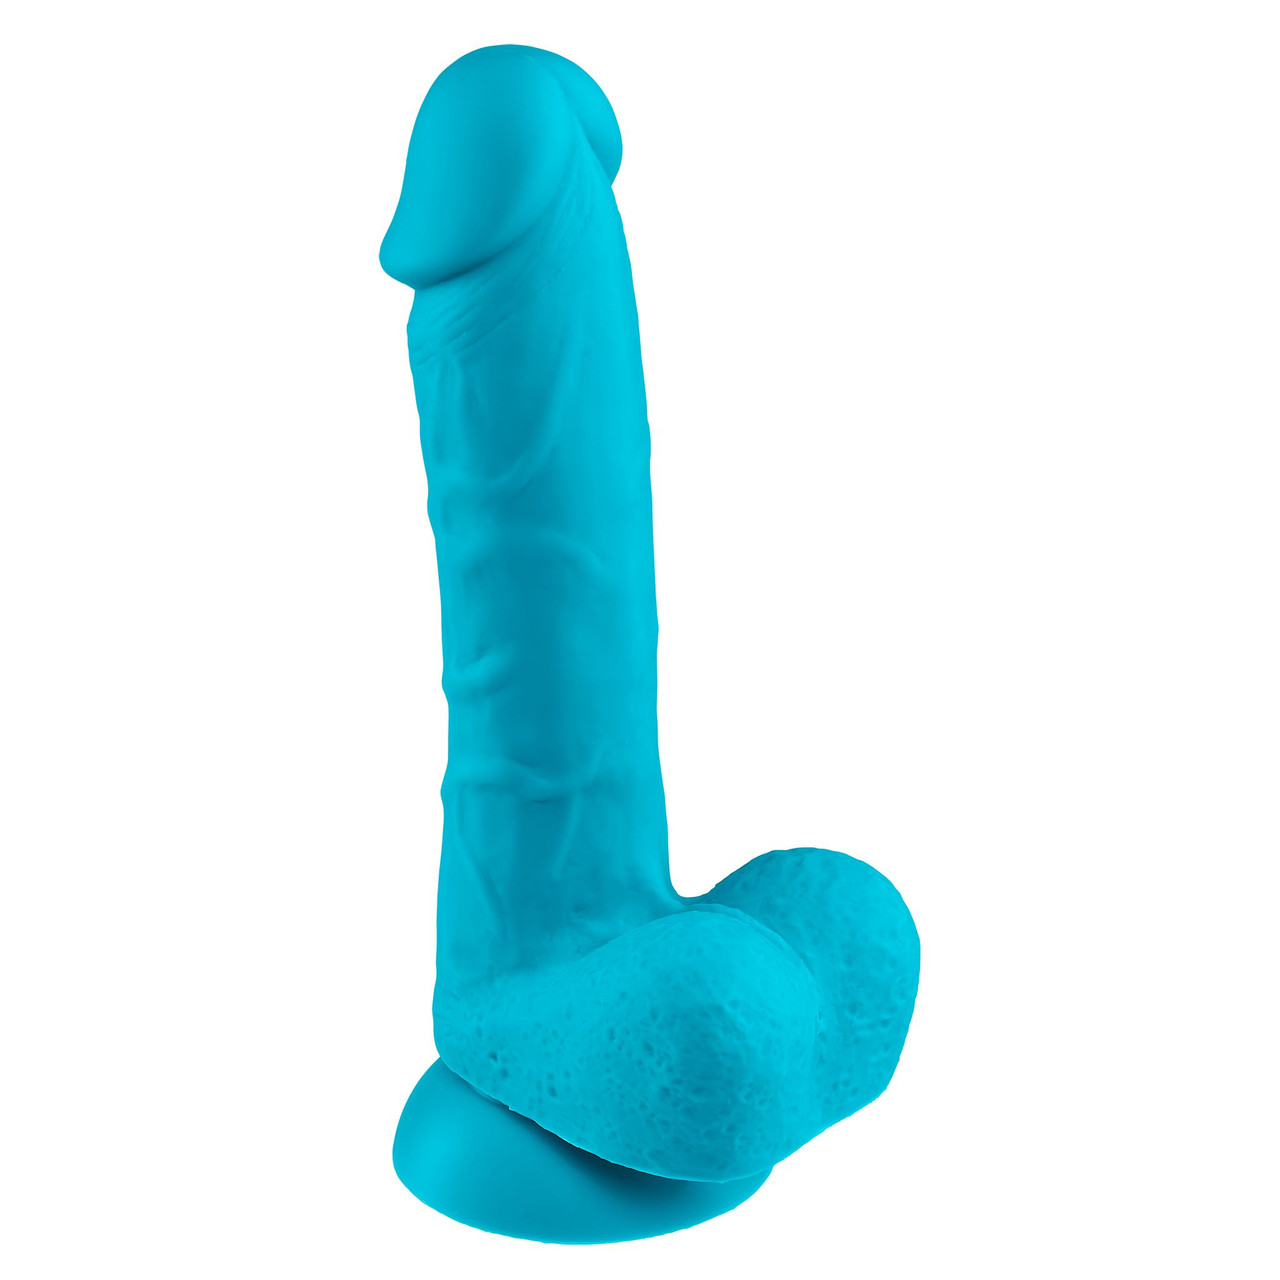 Vibrant Colors Pro Sensual Dildo 7 inch Teal | Realistic Dildos from Condom Depot